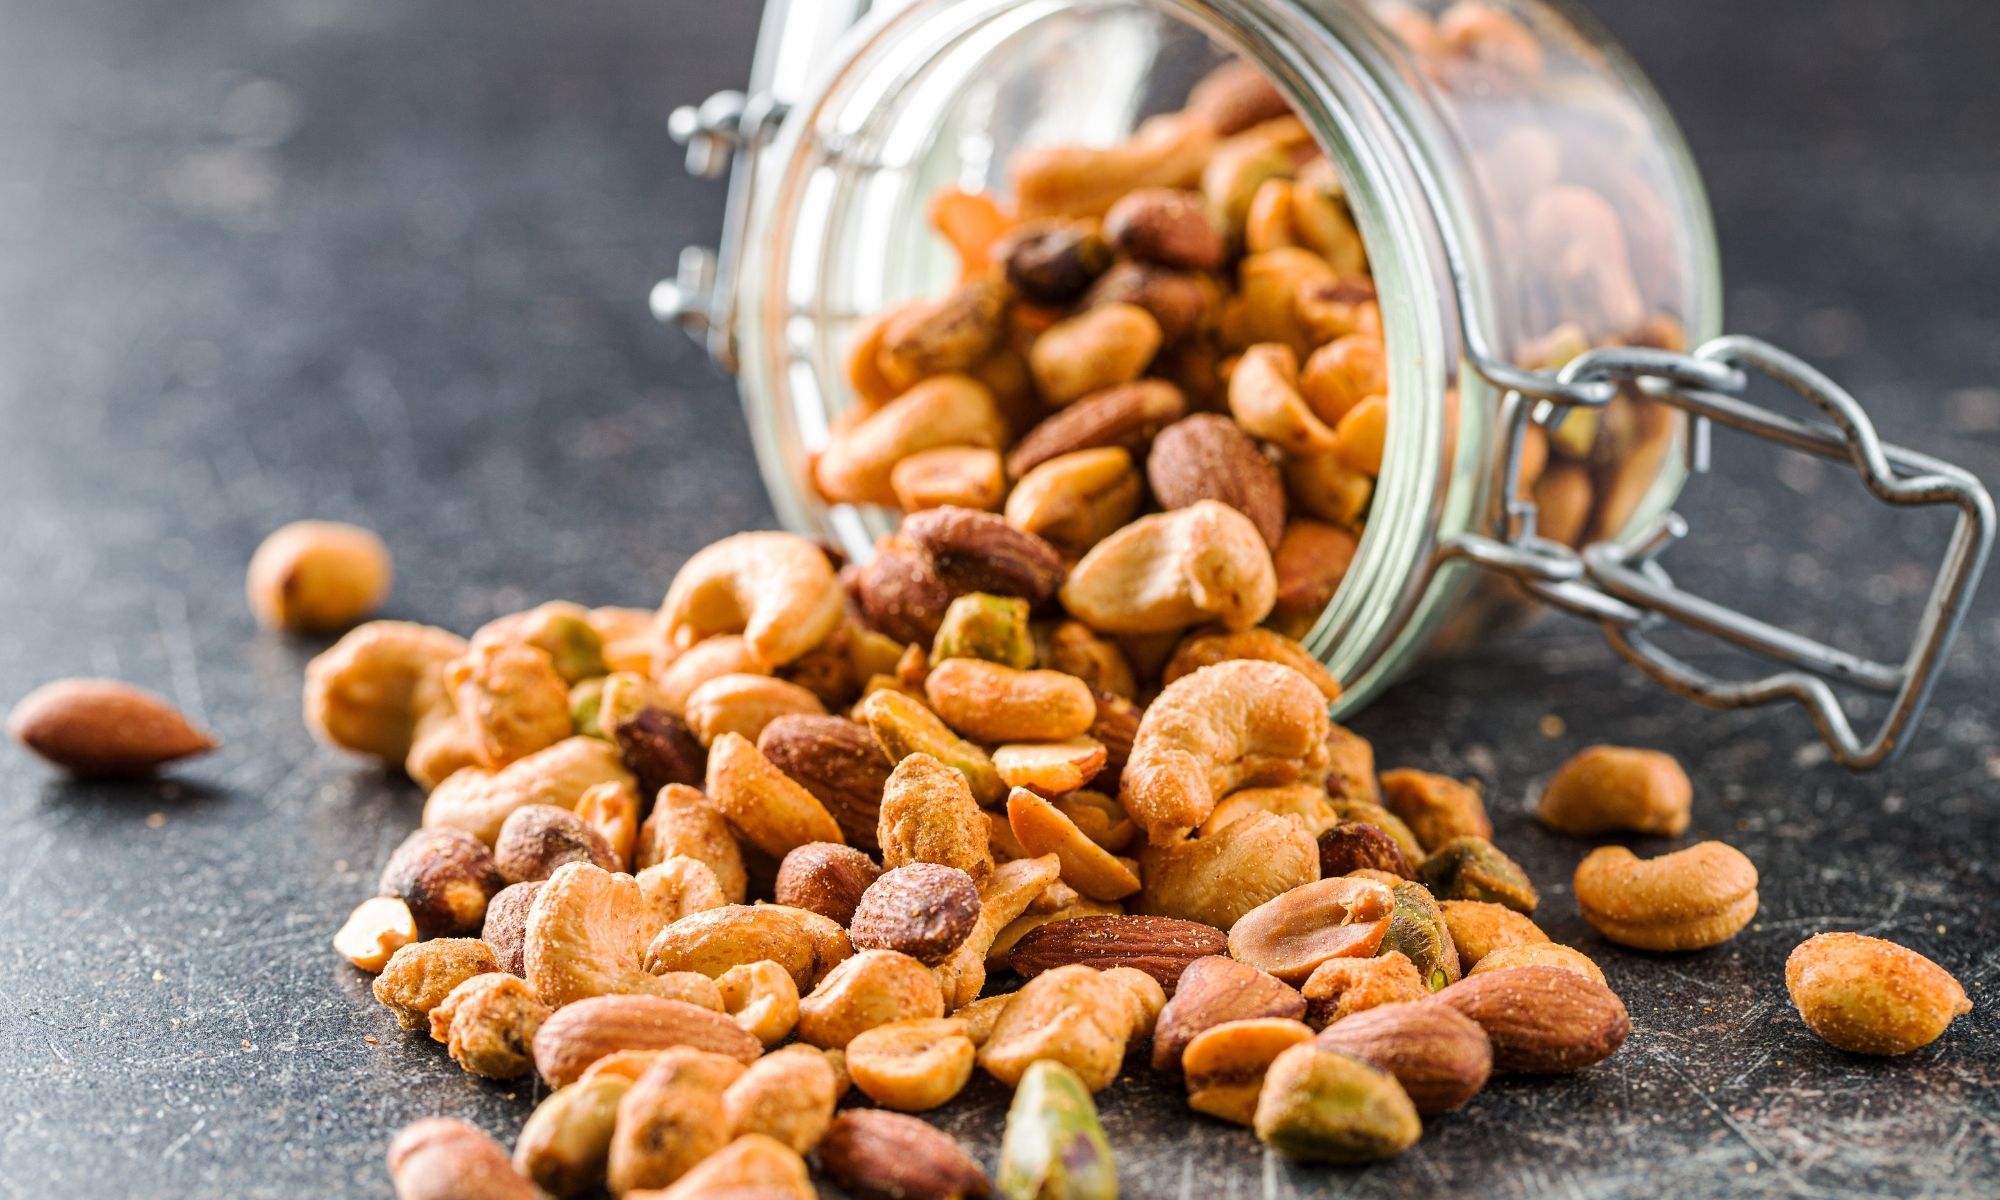 Peanuts, almonds and other nuts are a great source of protein